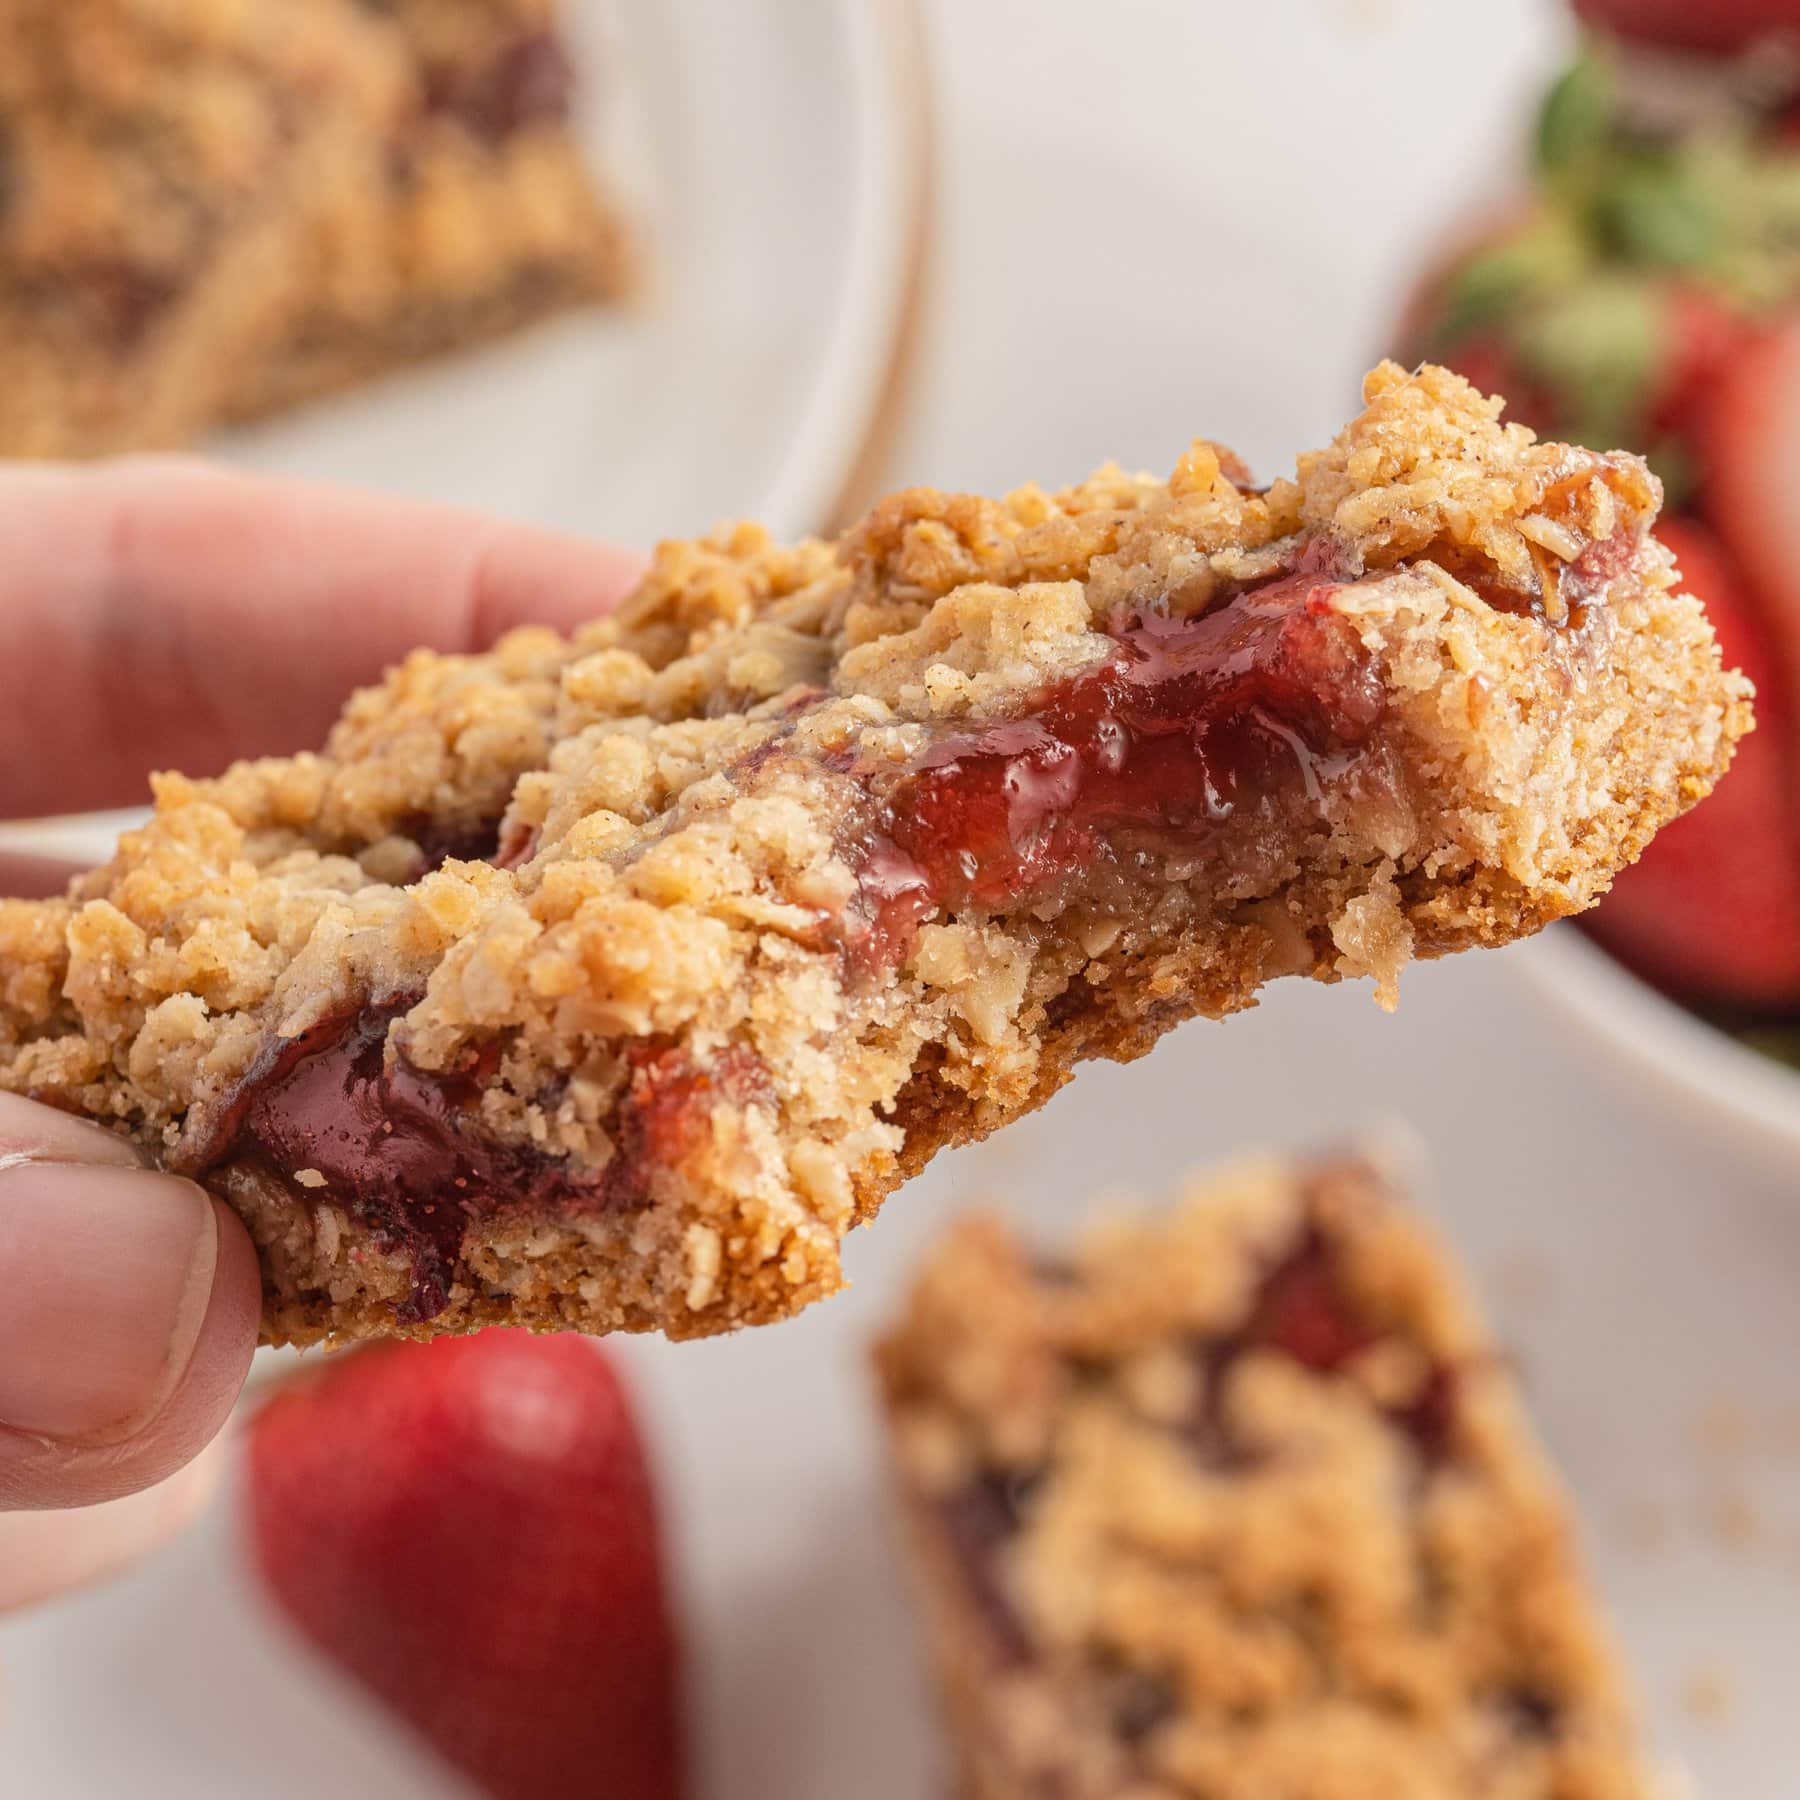 A hand holding a strawberry oatmeal bar with a bite missing.